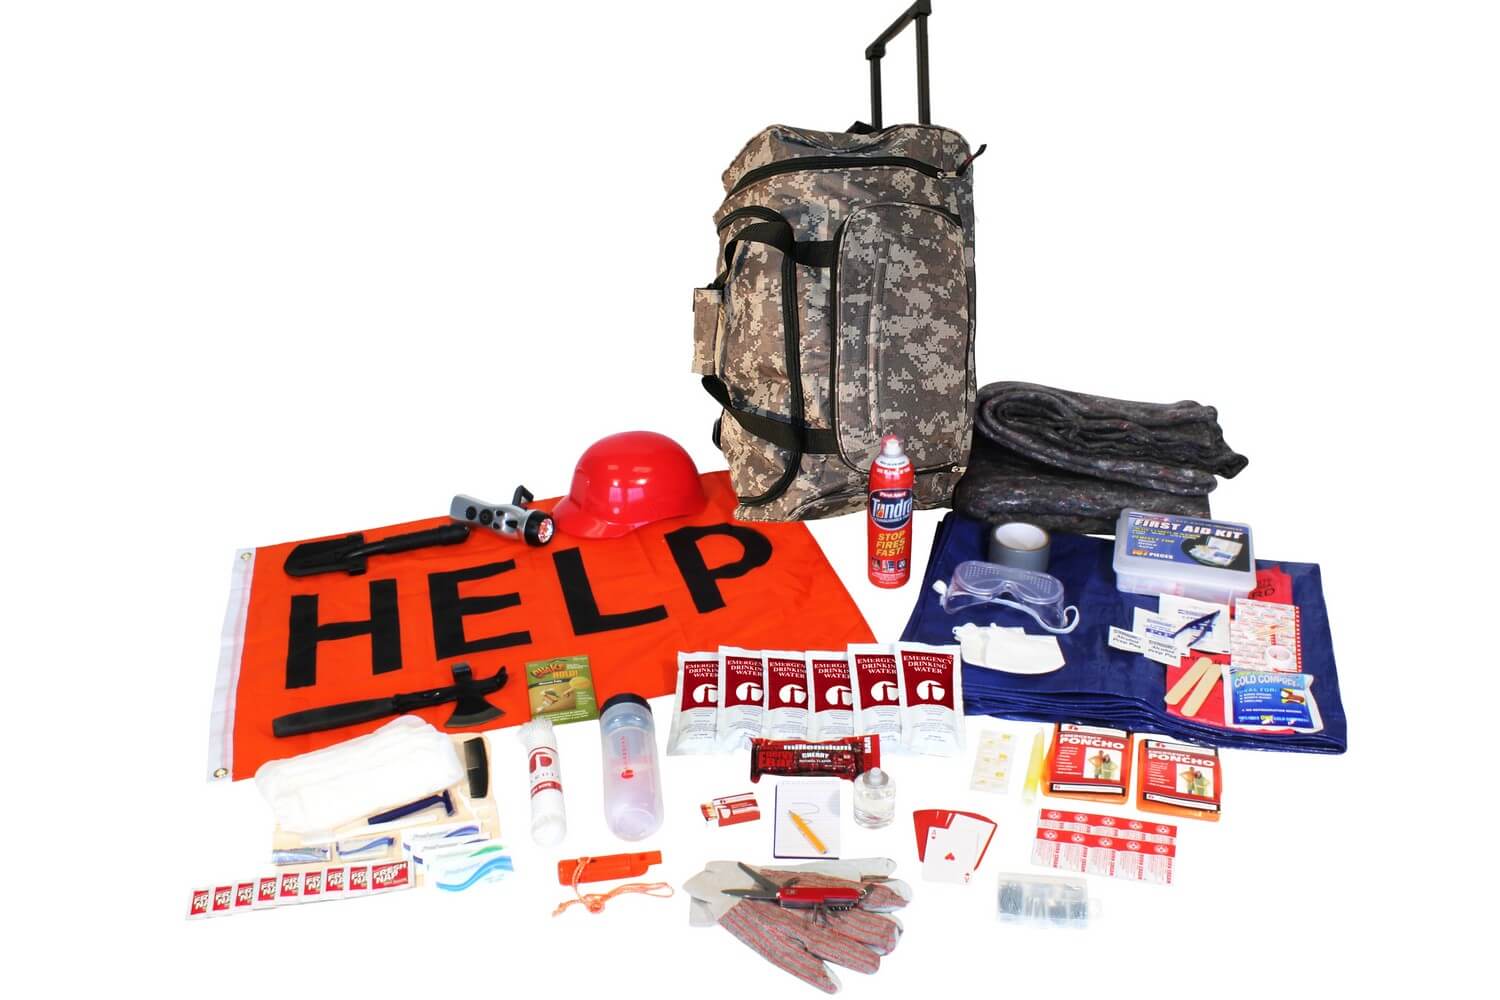 Deluxe 2-Person Survival Kit for Emergency Disaster Preparedness for  Earthquake, Hurricane, Fire, Evacuations, Auto, Home and Family